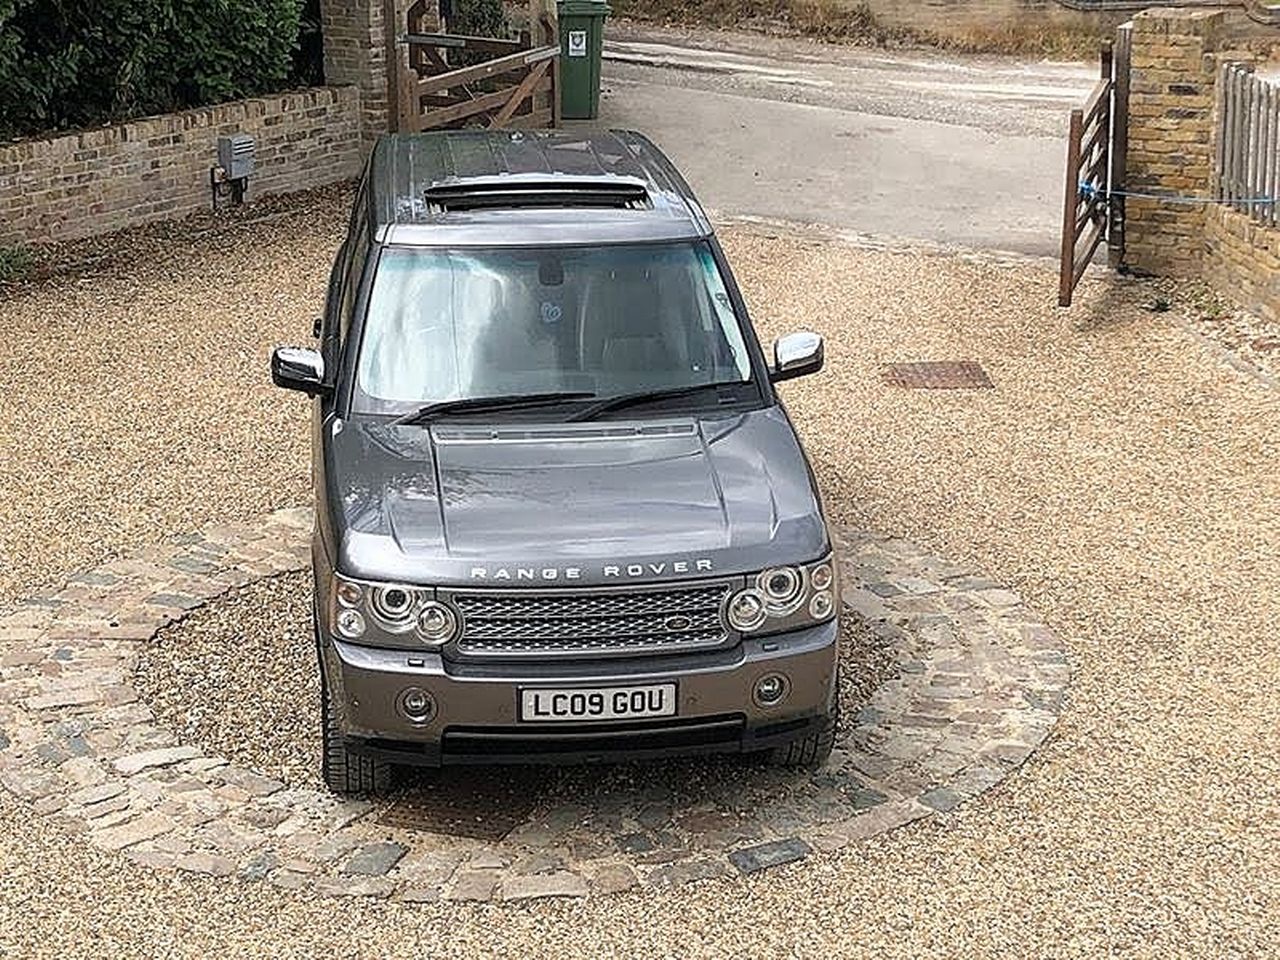 2009 LAND ROVER Range Rover TDV8 Westminster - Picture 1 of 15